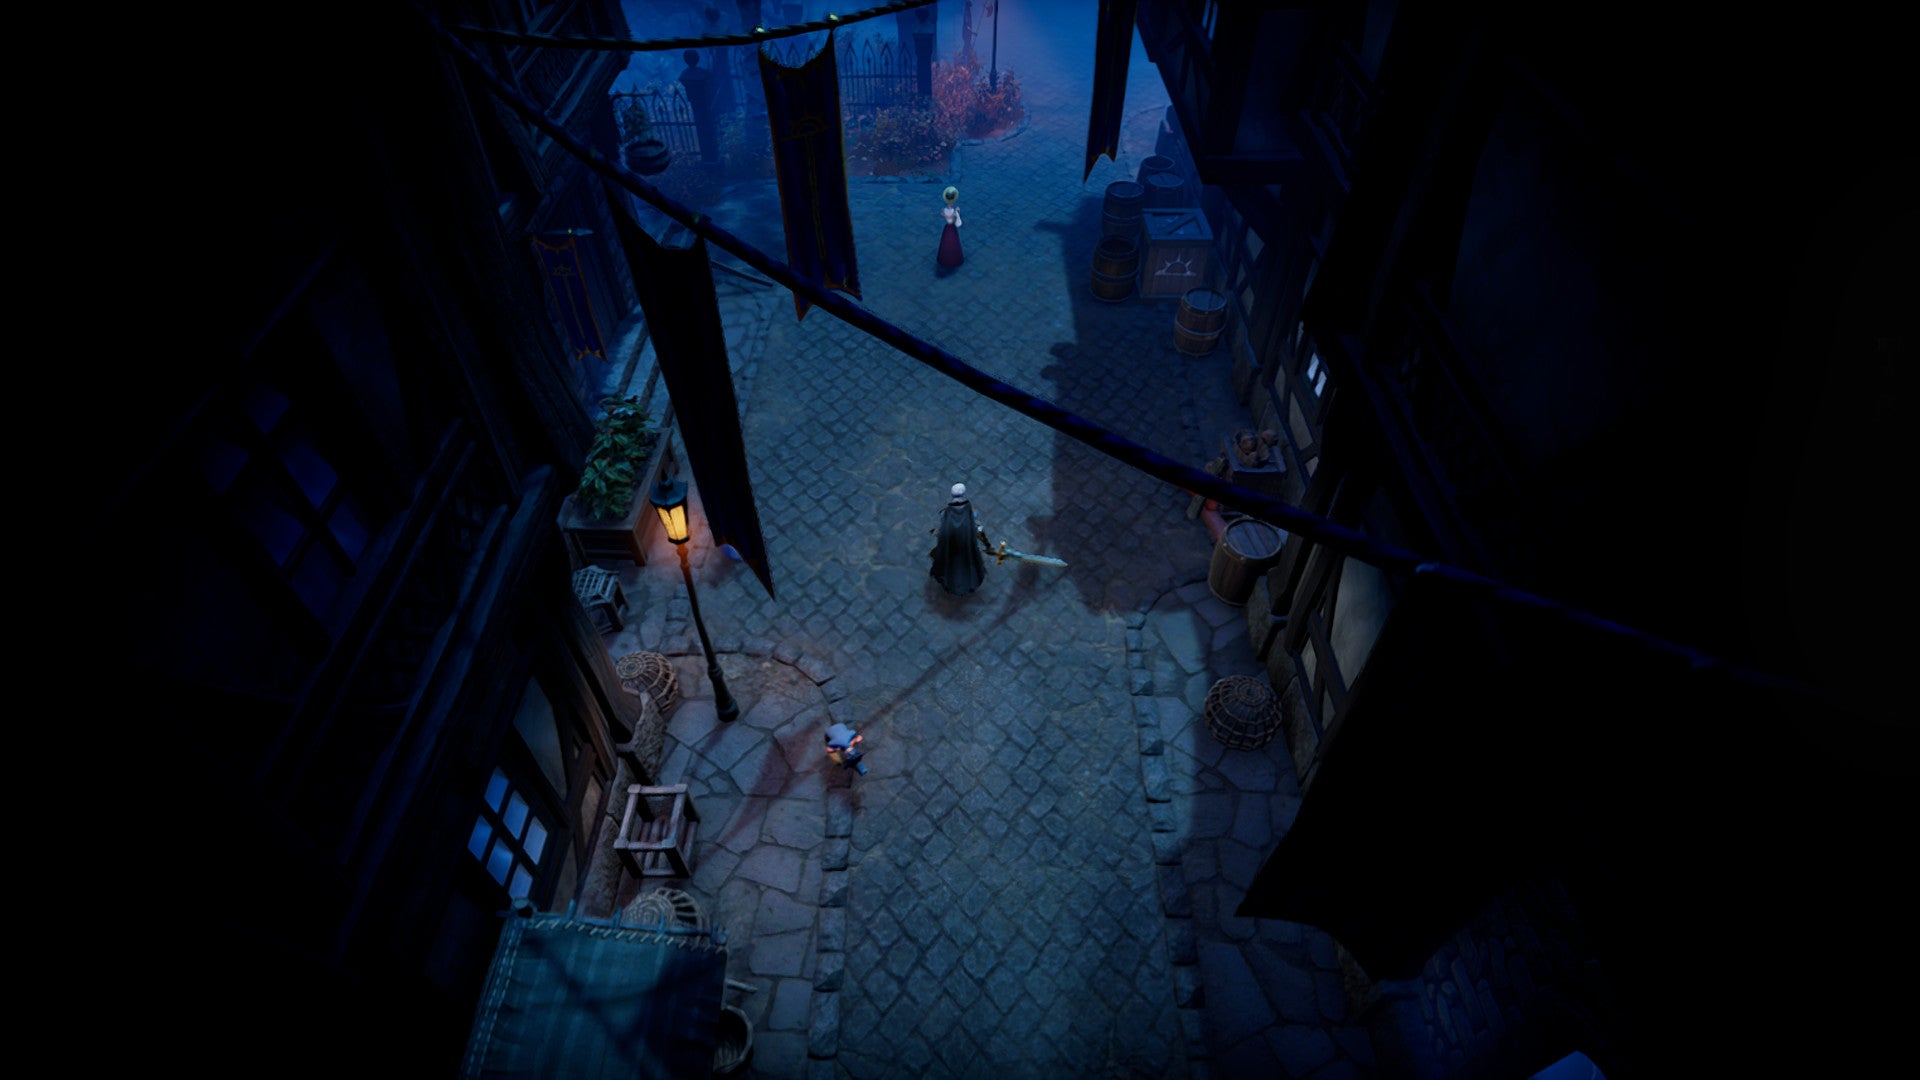 The player in V Rising walks down an alleyway at night, stalking a human.